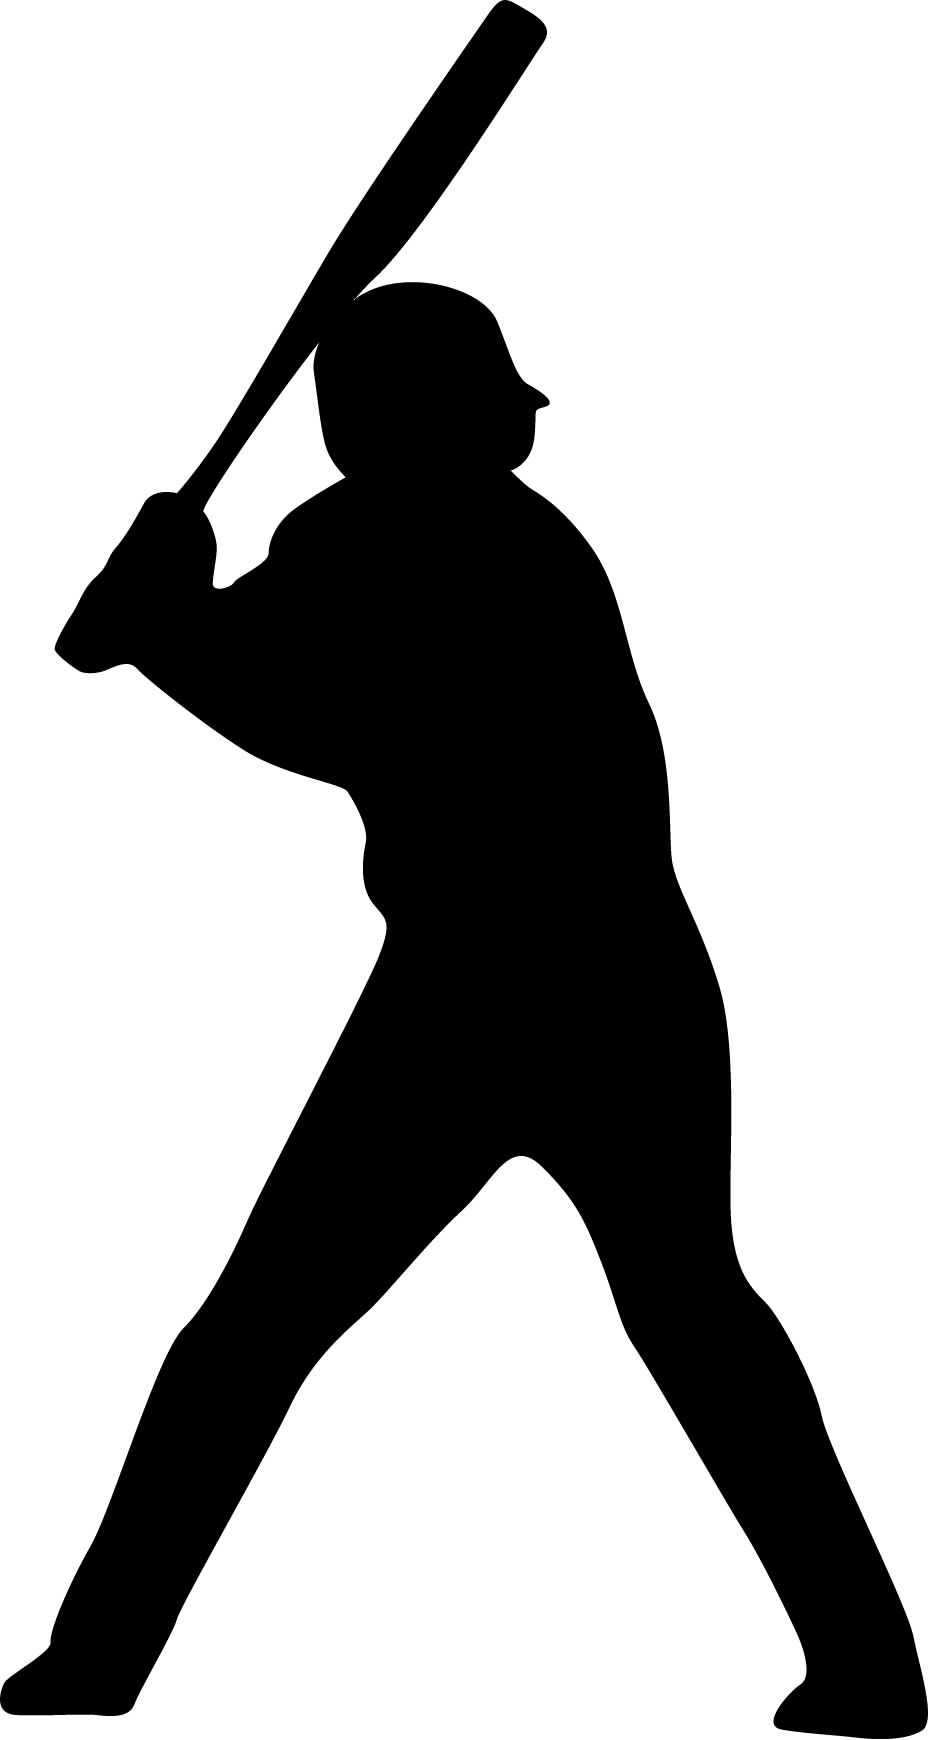 Baseball Pitcher clipart. Free download transparent .PNG